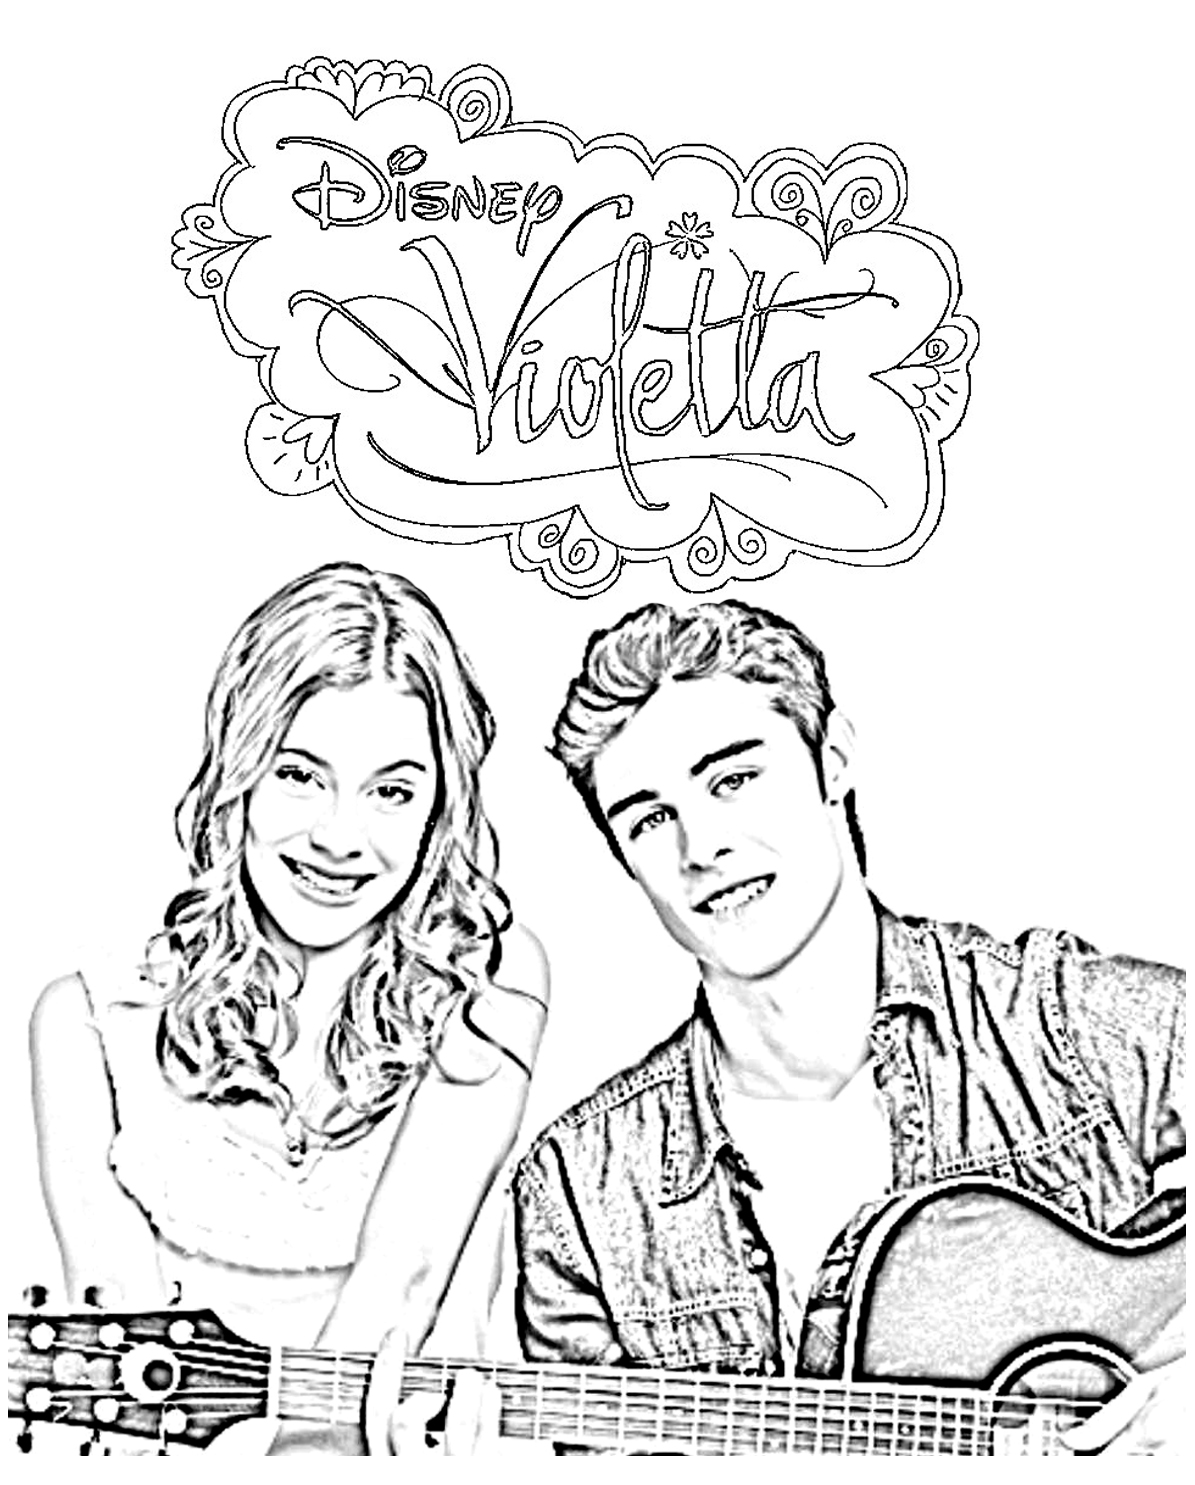 Simple Violetta coloring page